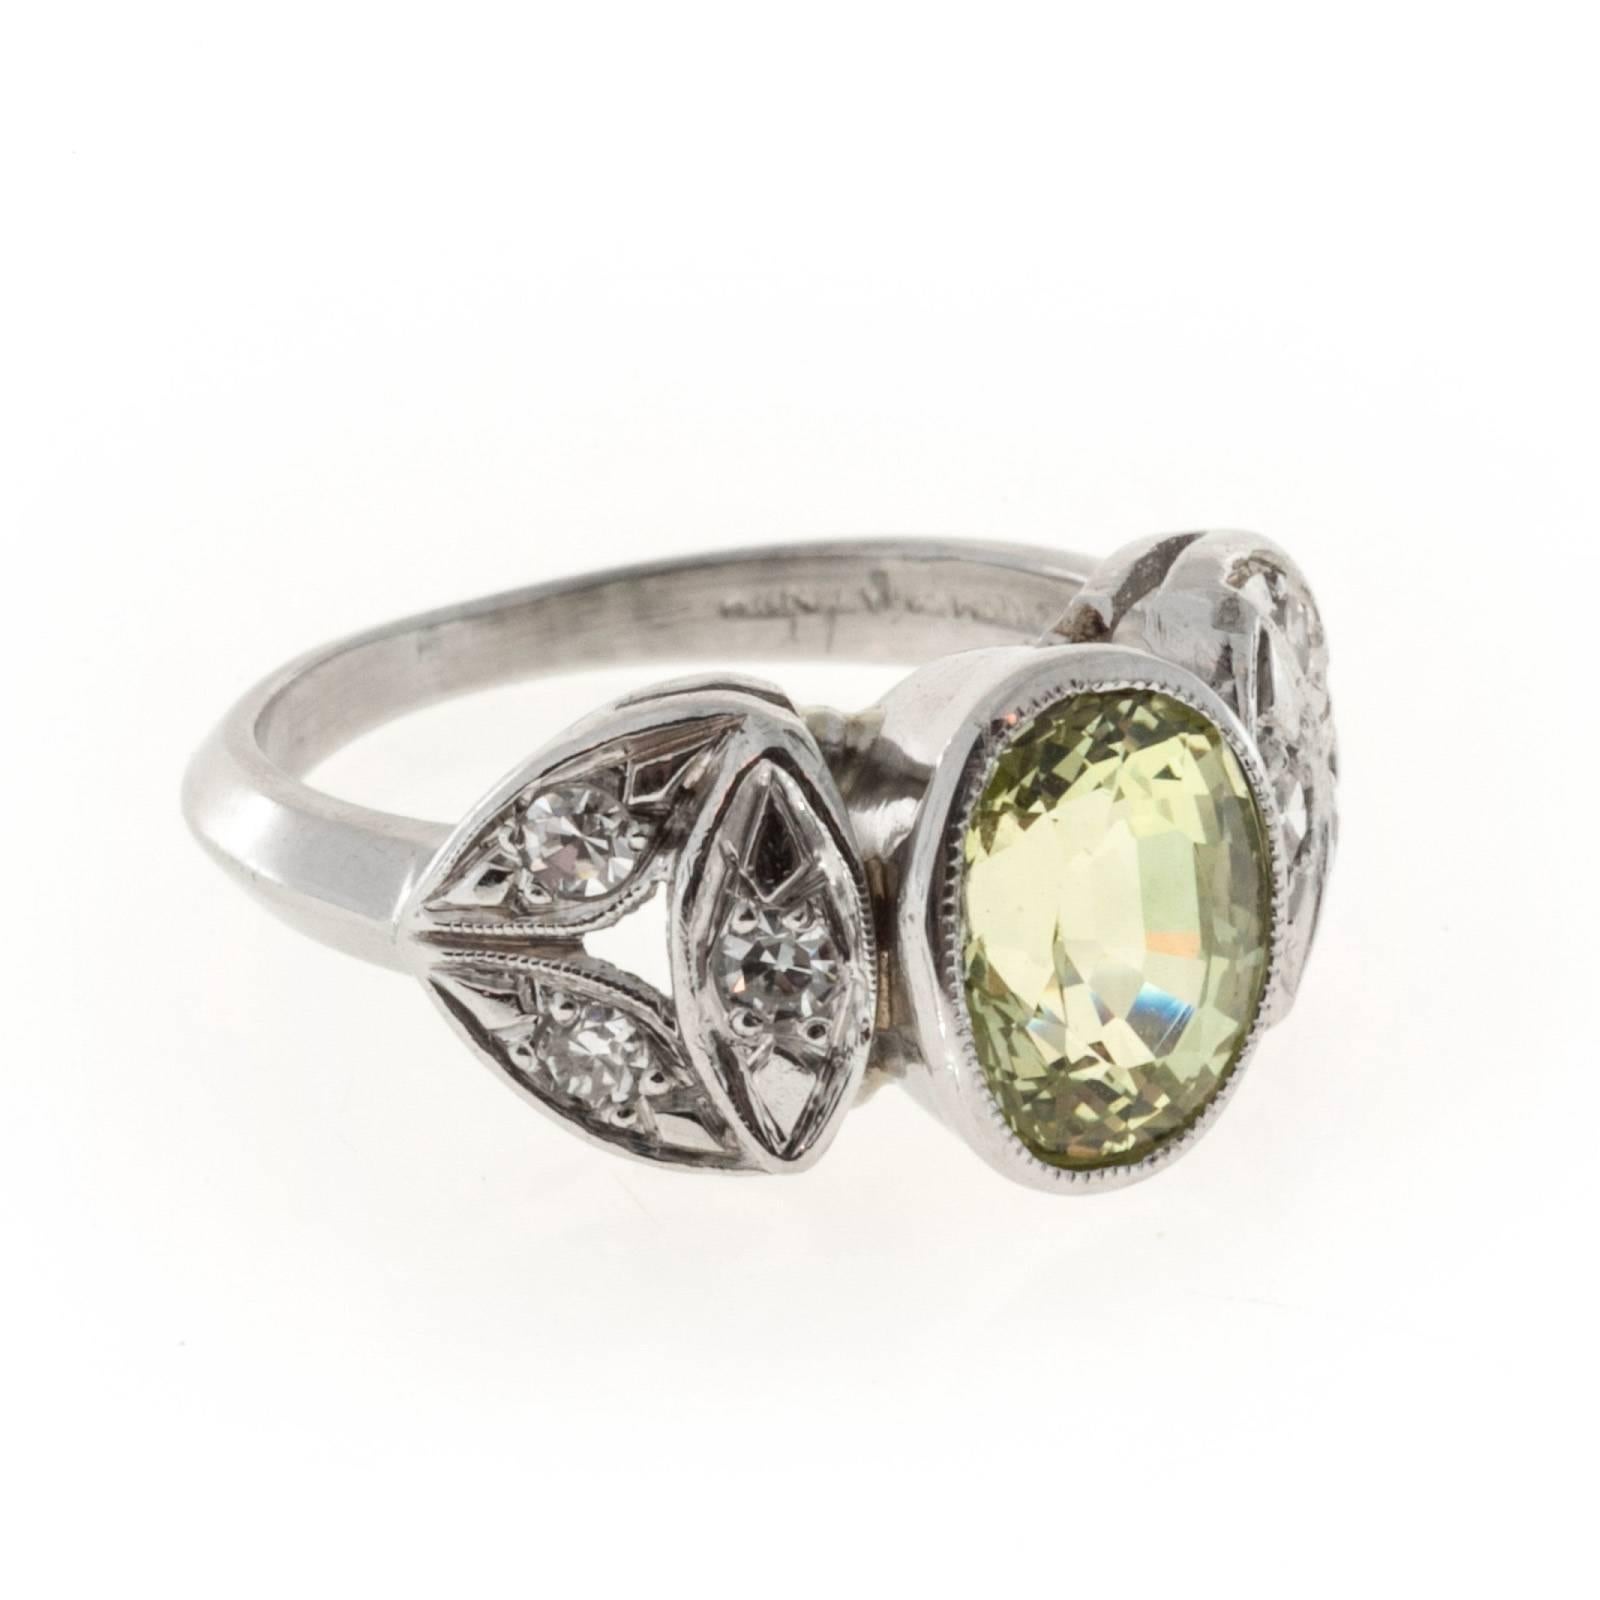 Late Art Deco 1940 handmade Platinum ring with all natural greenish  Chrysoberyl 2.61ct center and nice single cut side diamonds. AGL

1 natural oval Chrysoberyl, approx. total weight 2.61cts, VS, 8.91 x 6.89 x 5.45mm, AGL certificate #GB109545
6